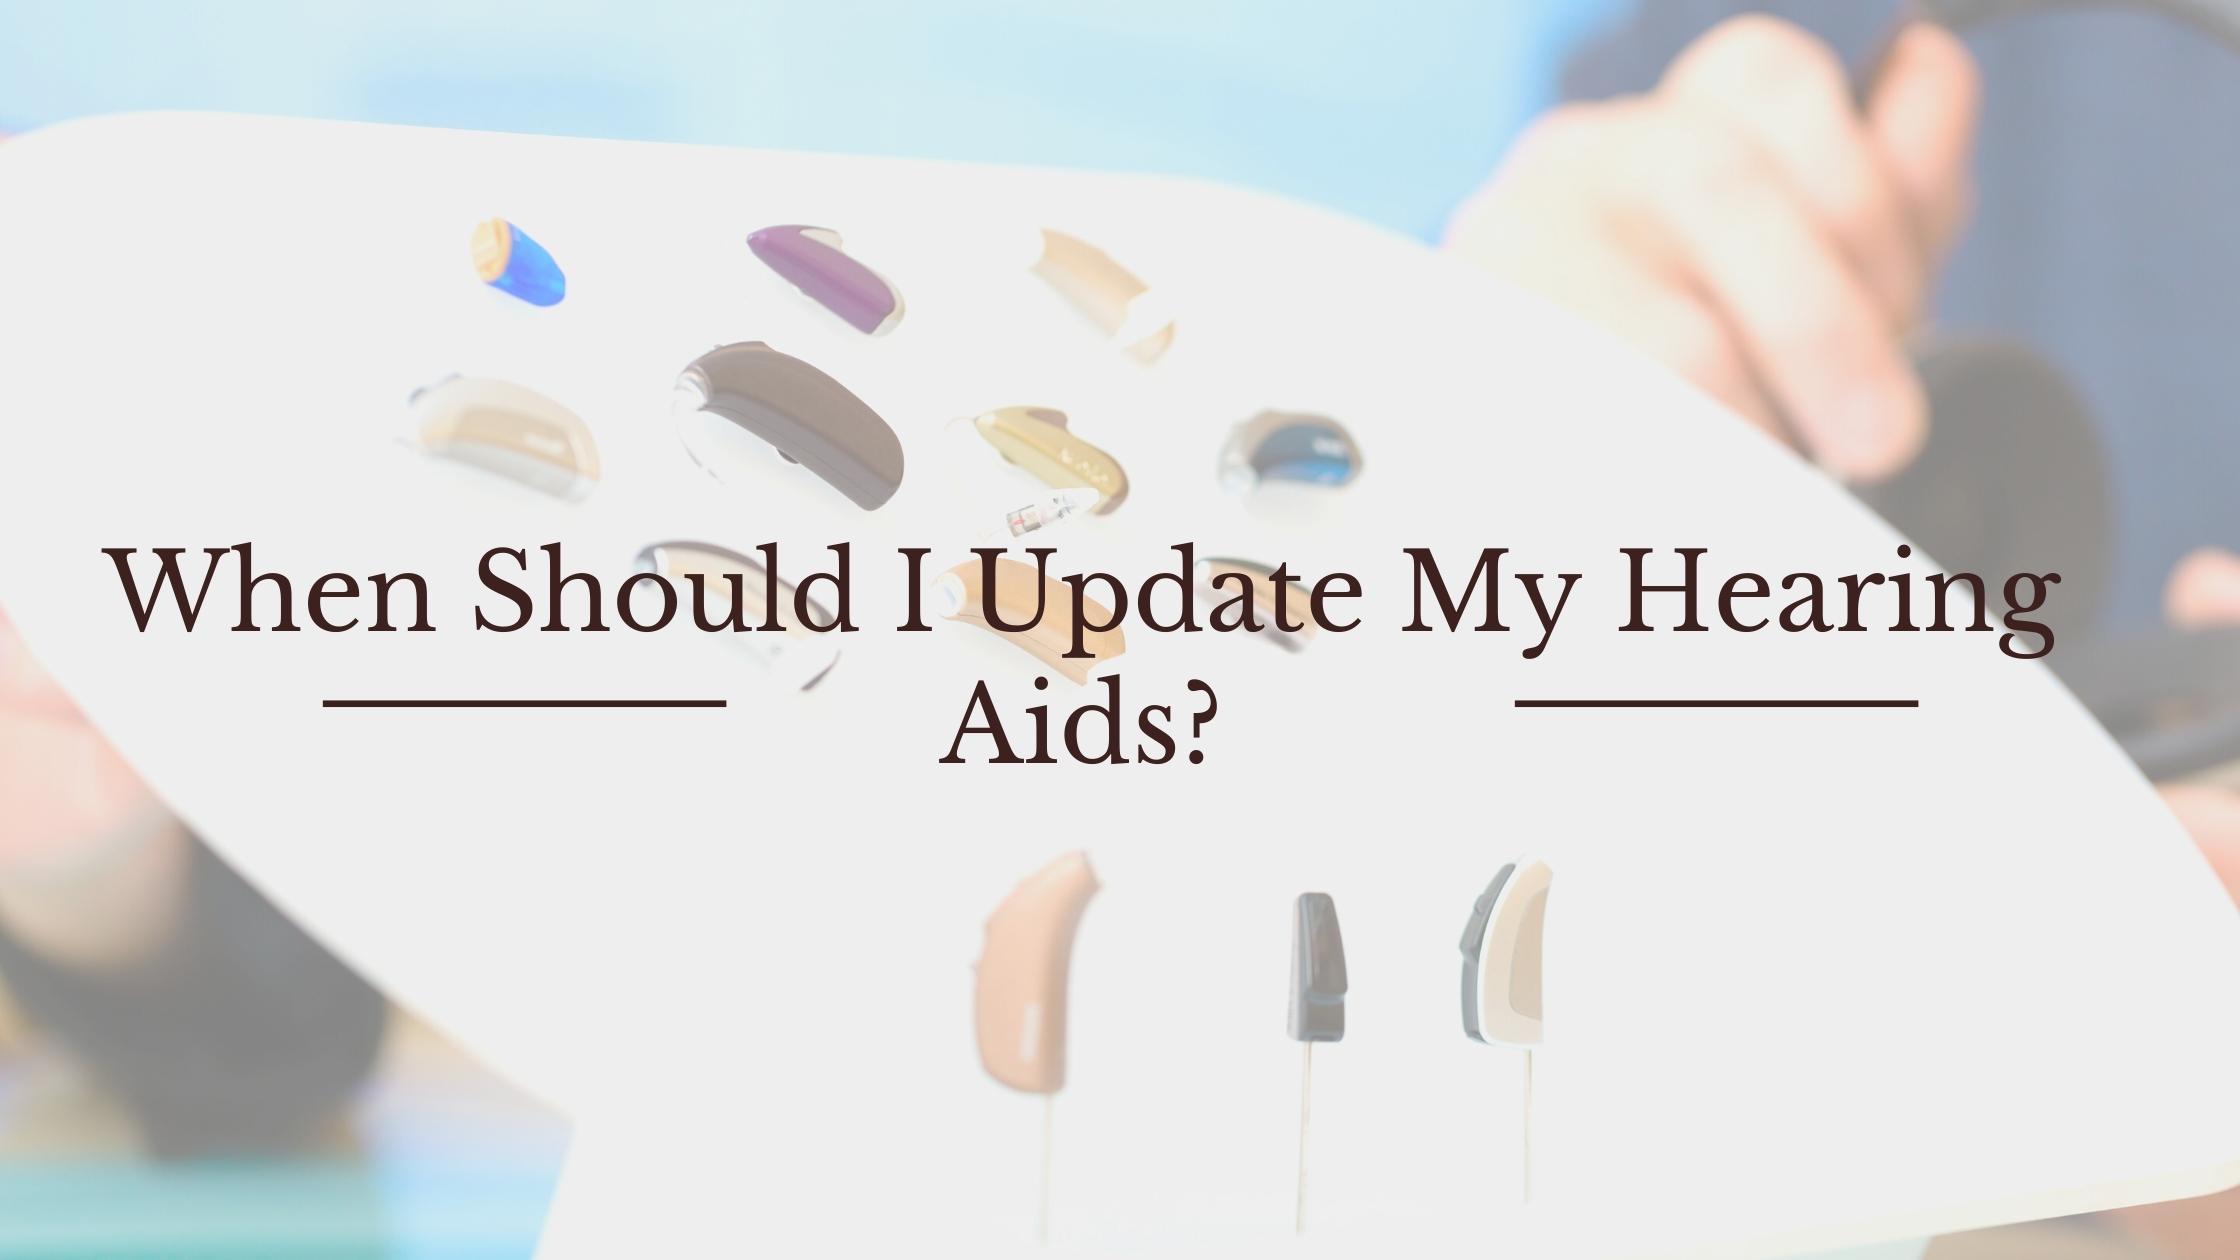 Featured image for “When Should I Update My Hearing Aids?”